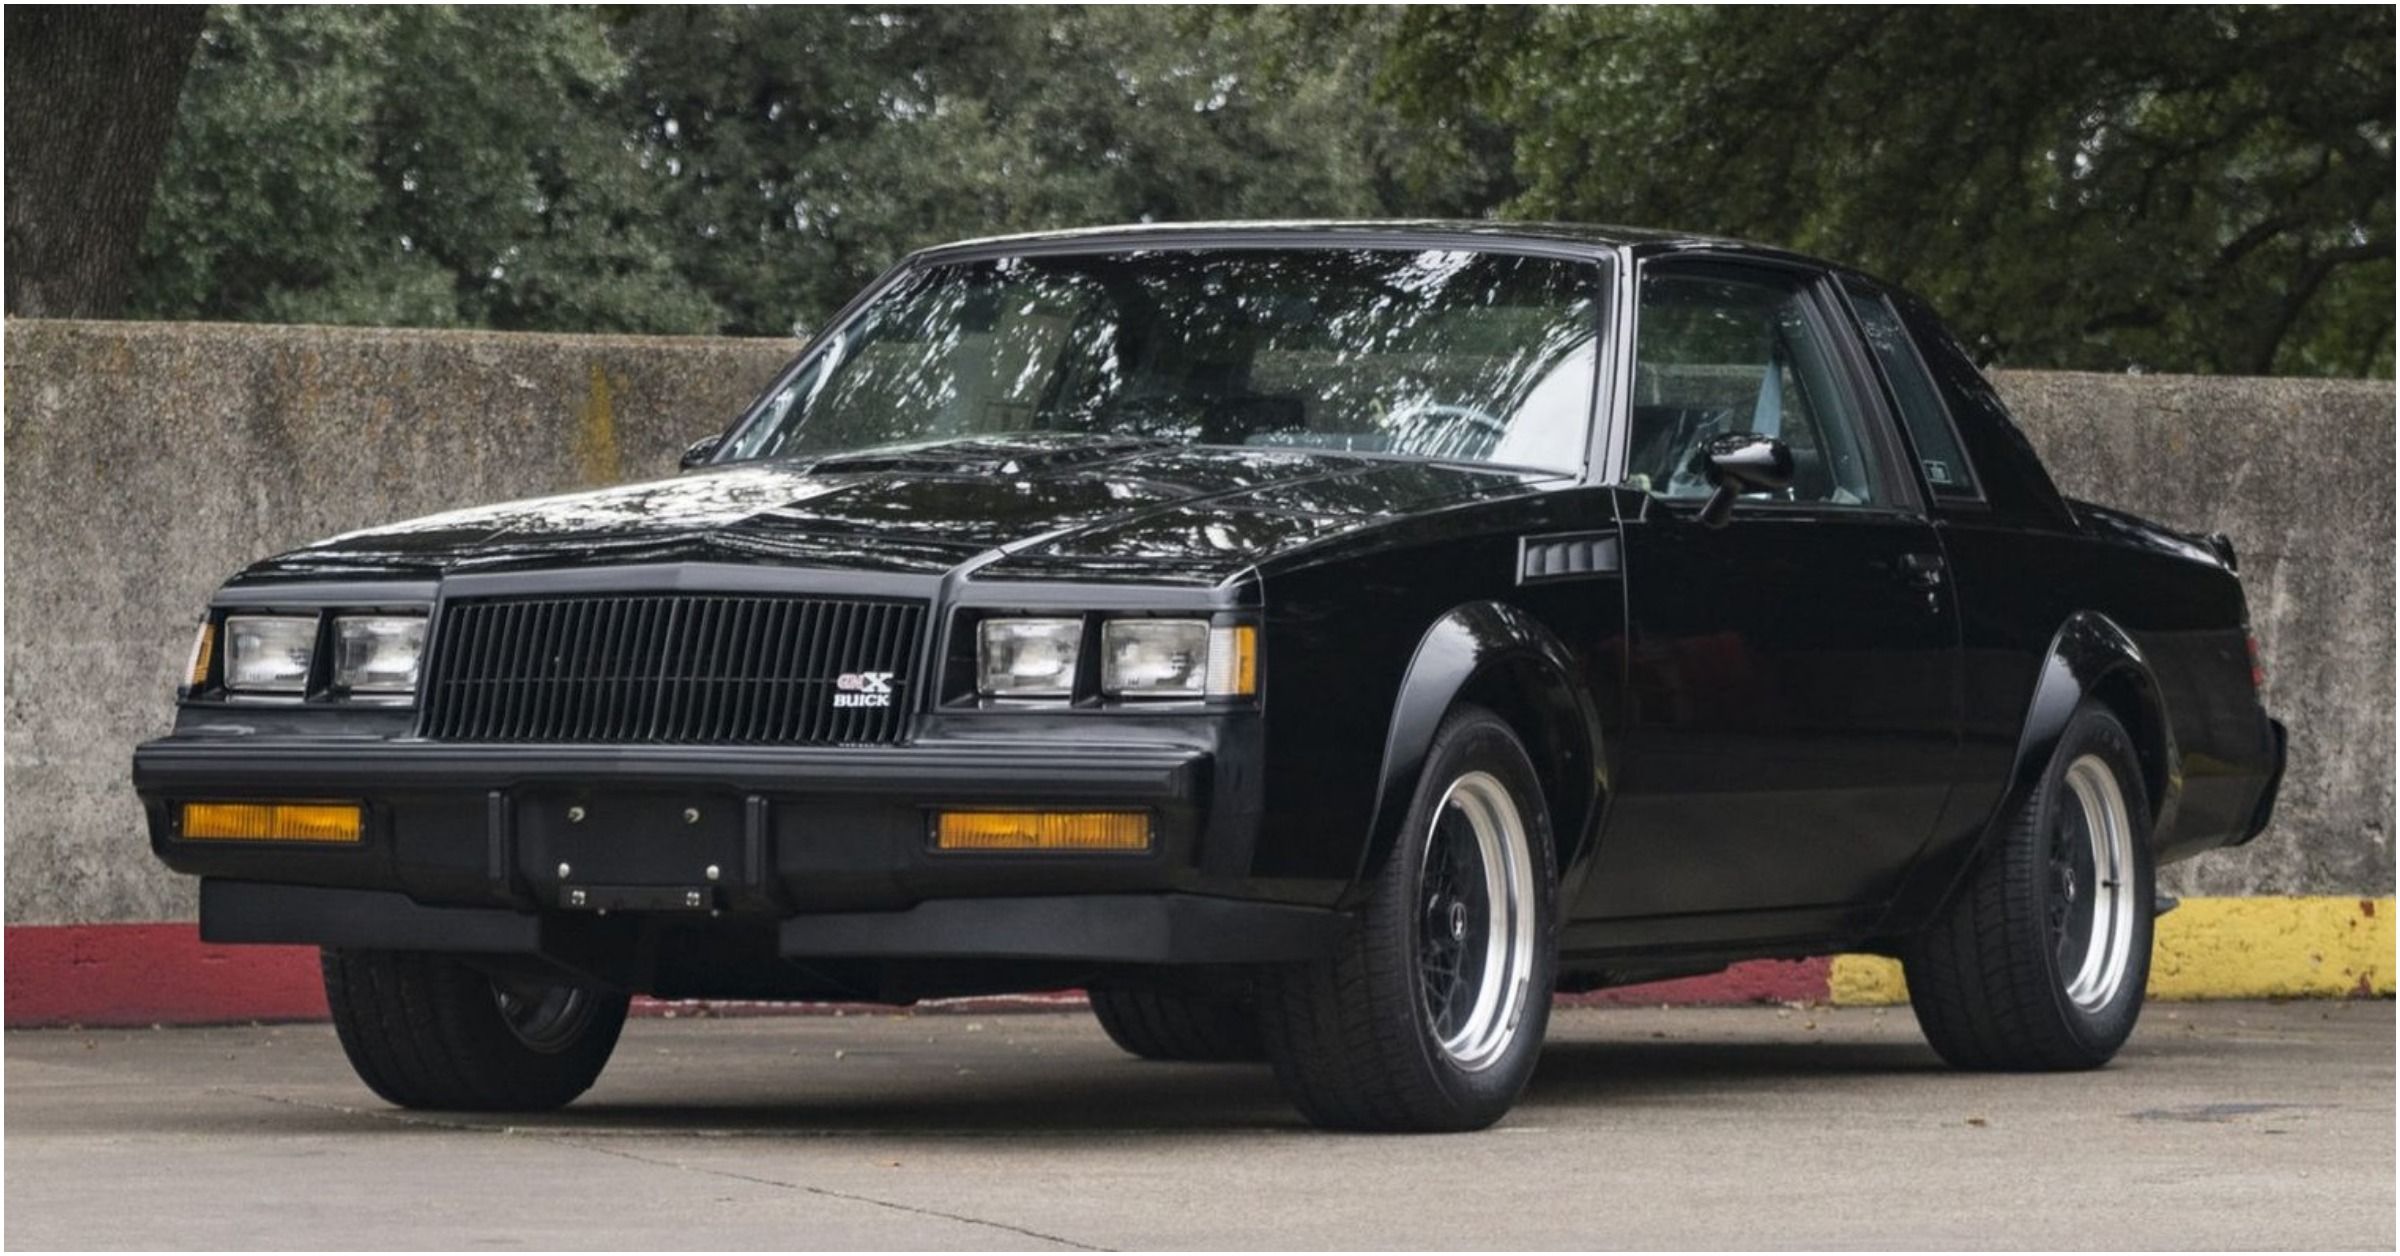 5 Vintage Cars Of The '80s We Wouldn't Collect (And 10 Worth Every Dollar)